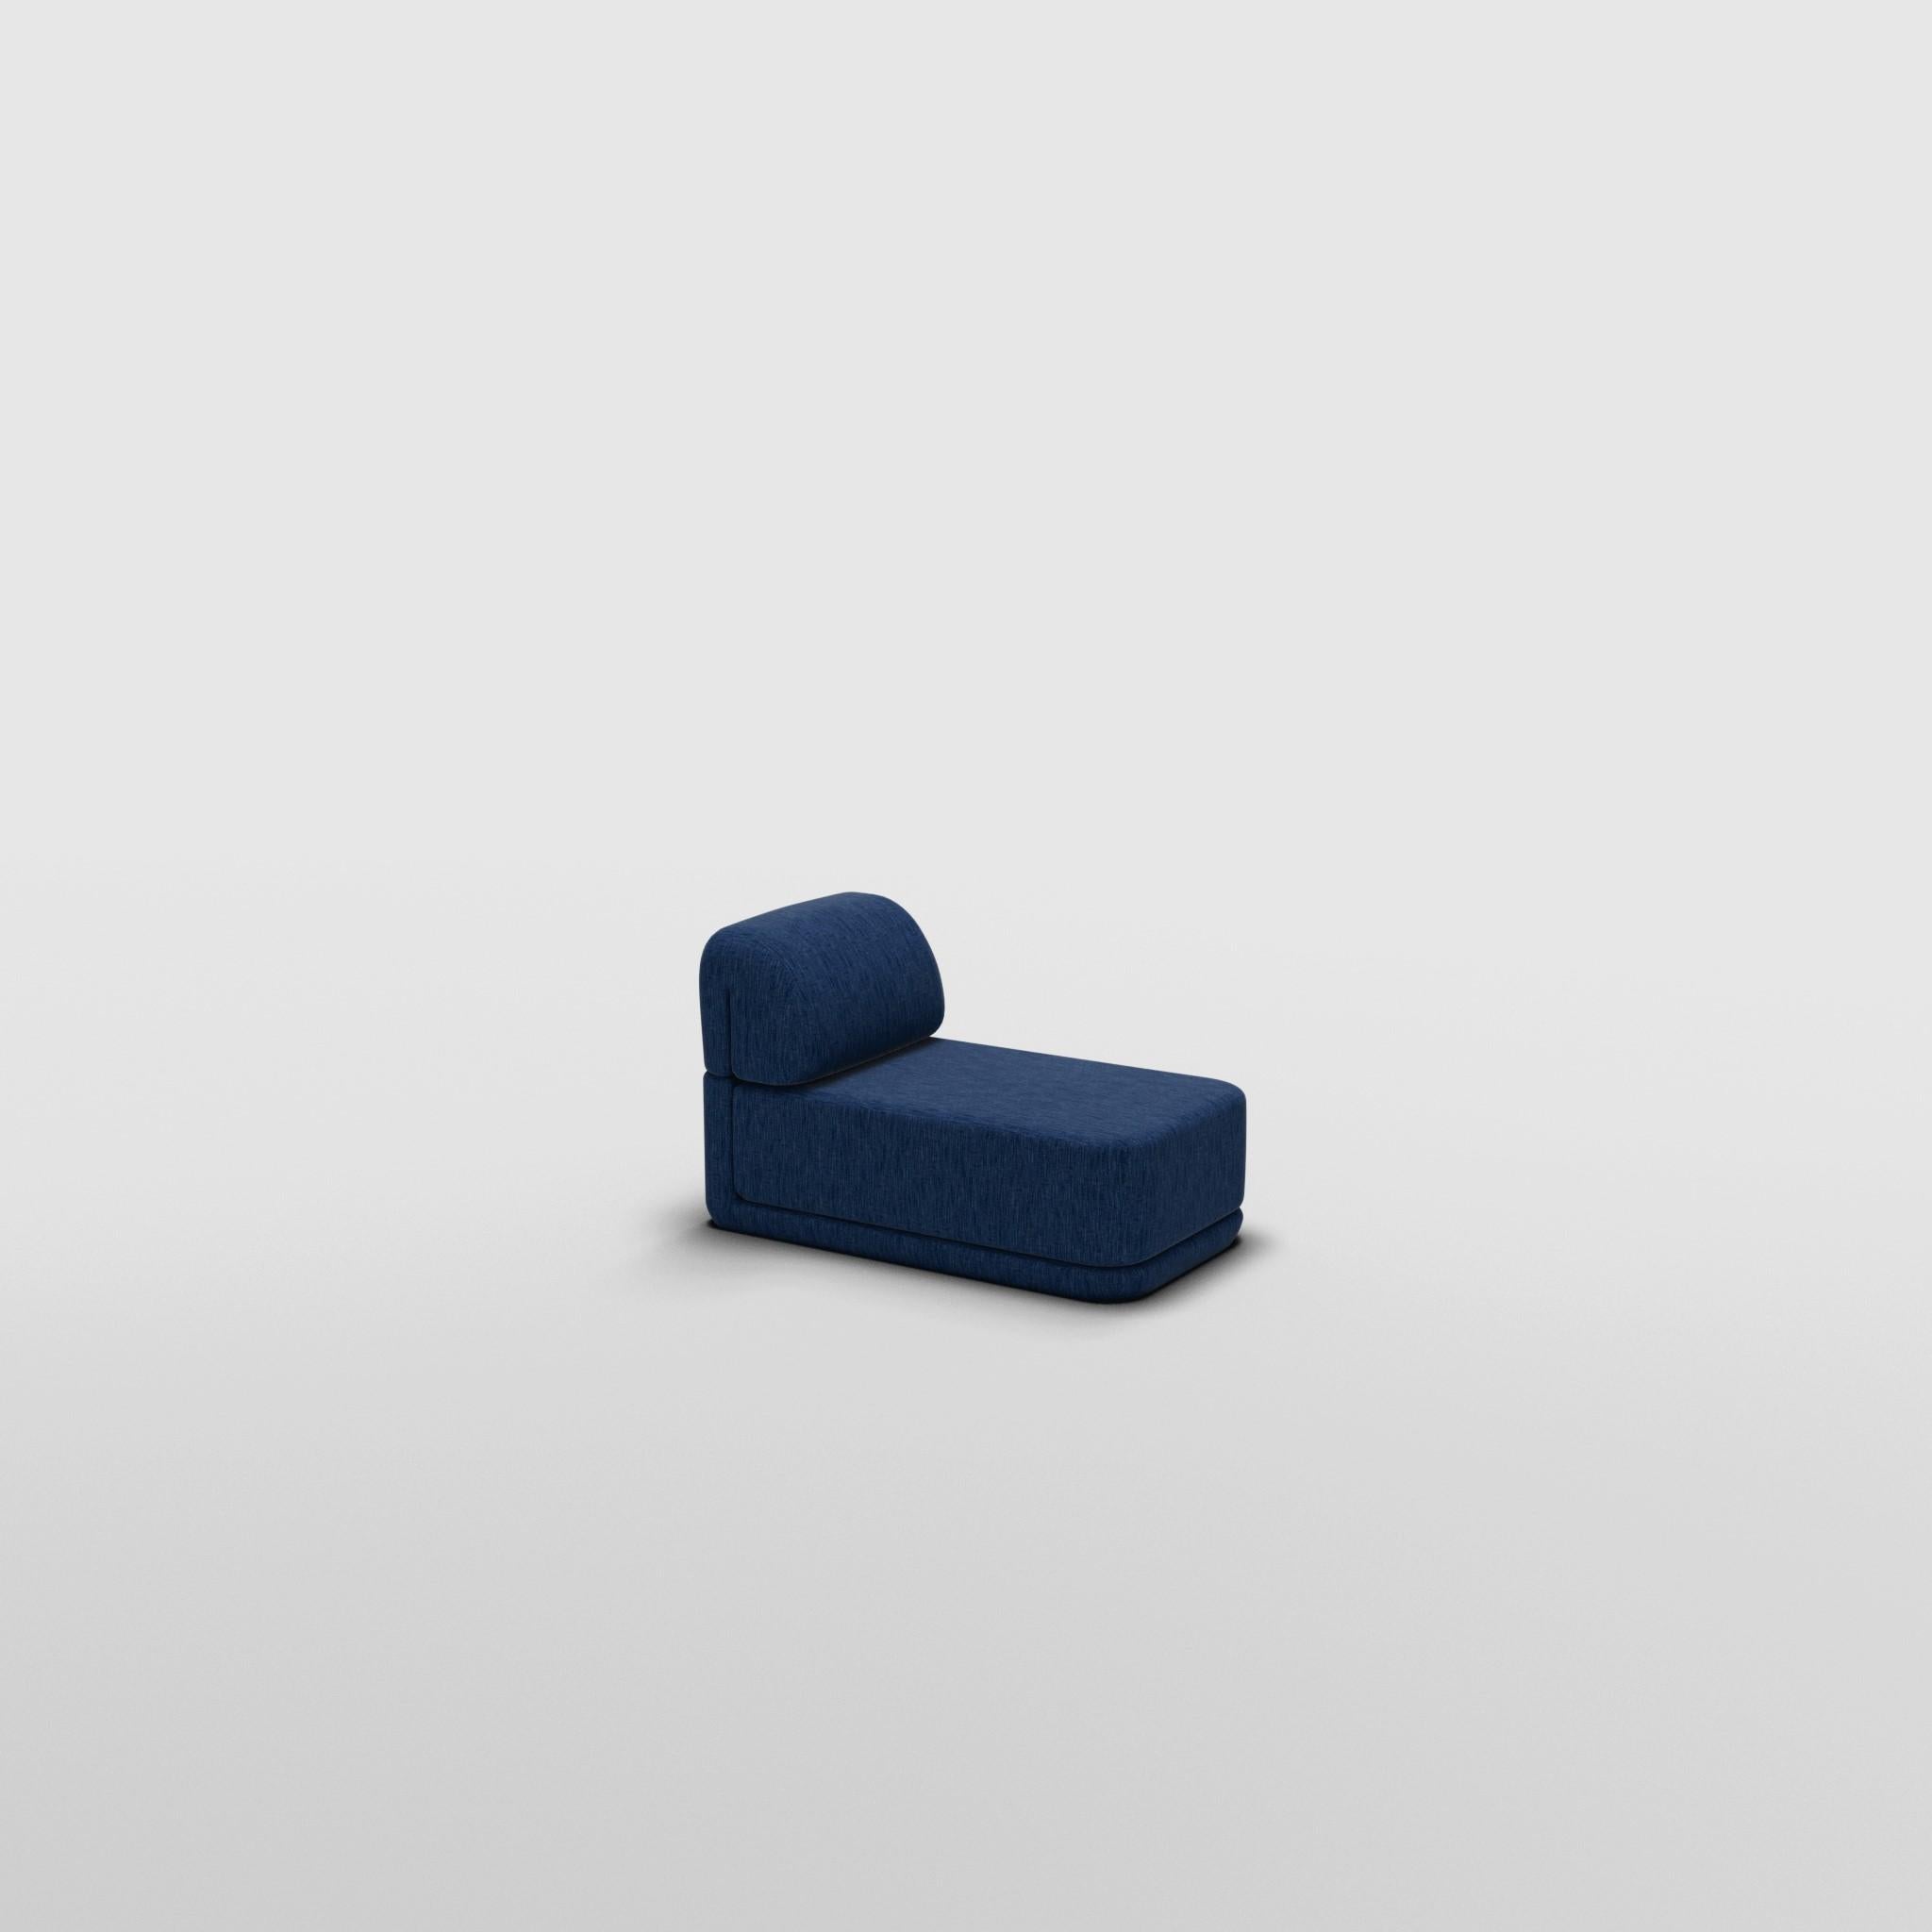 Contemporary The Cube Sofa - Slim Cube Lounge For Sale